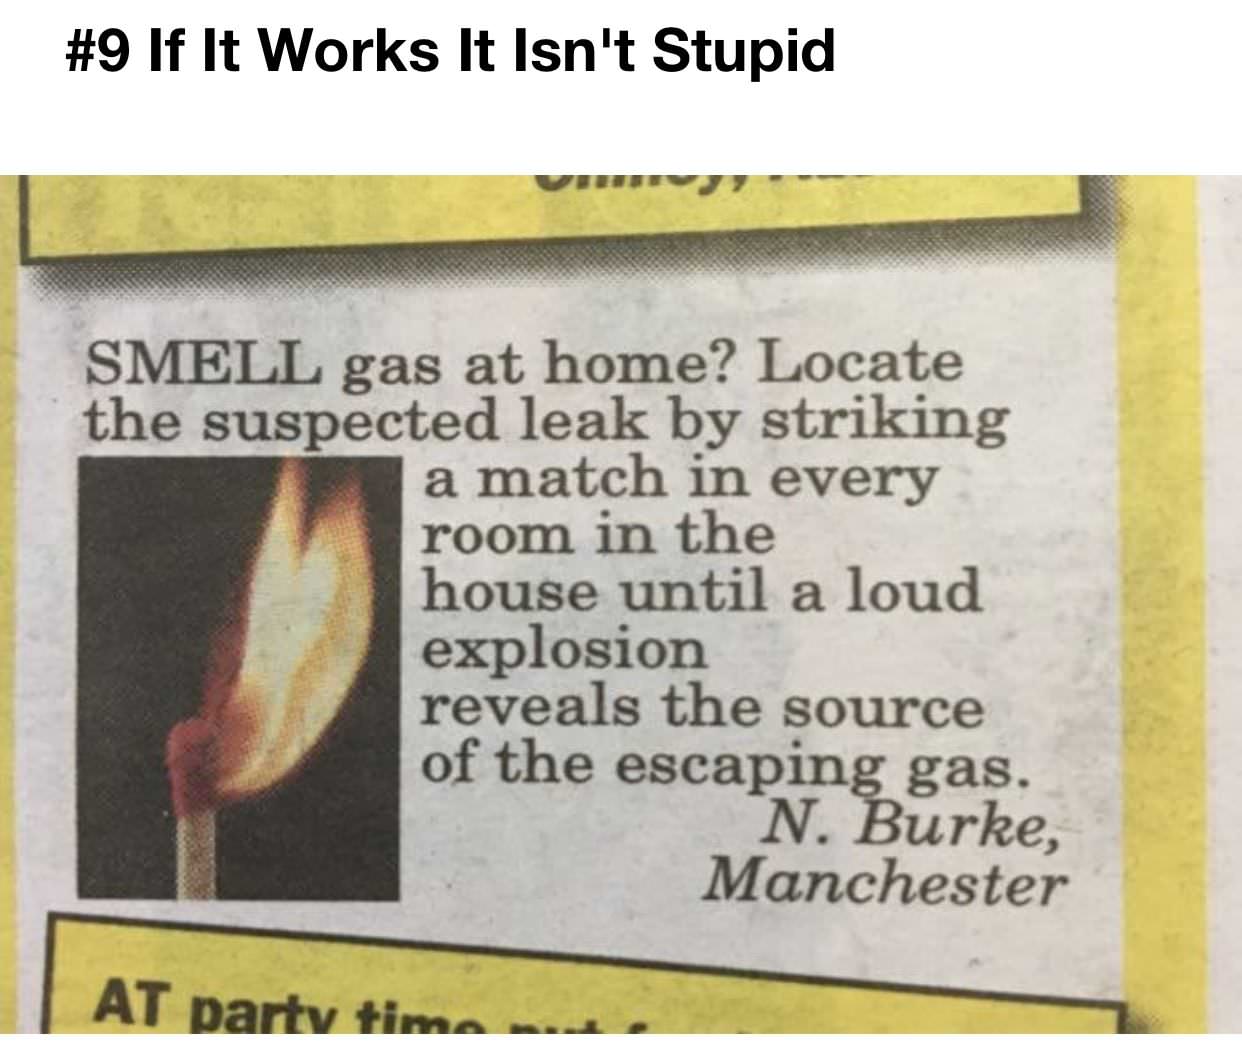 smell gas at home locate the suspected leak by lighting a match - If It Works It Isn't Stupid Smell gas at home? Locate the suspected leak by striking a match in every room in the house until a loud explosion reveals the source of the escaping gas. N. Bur